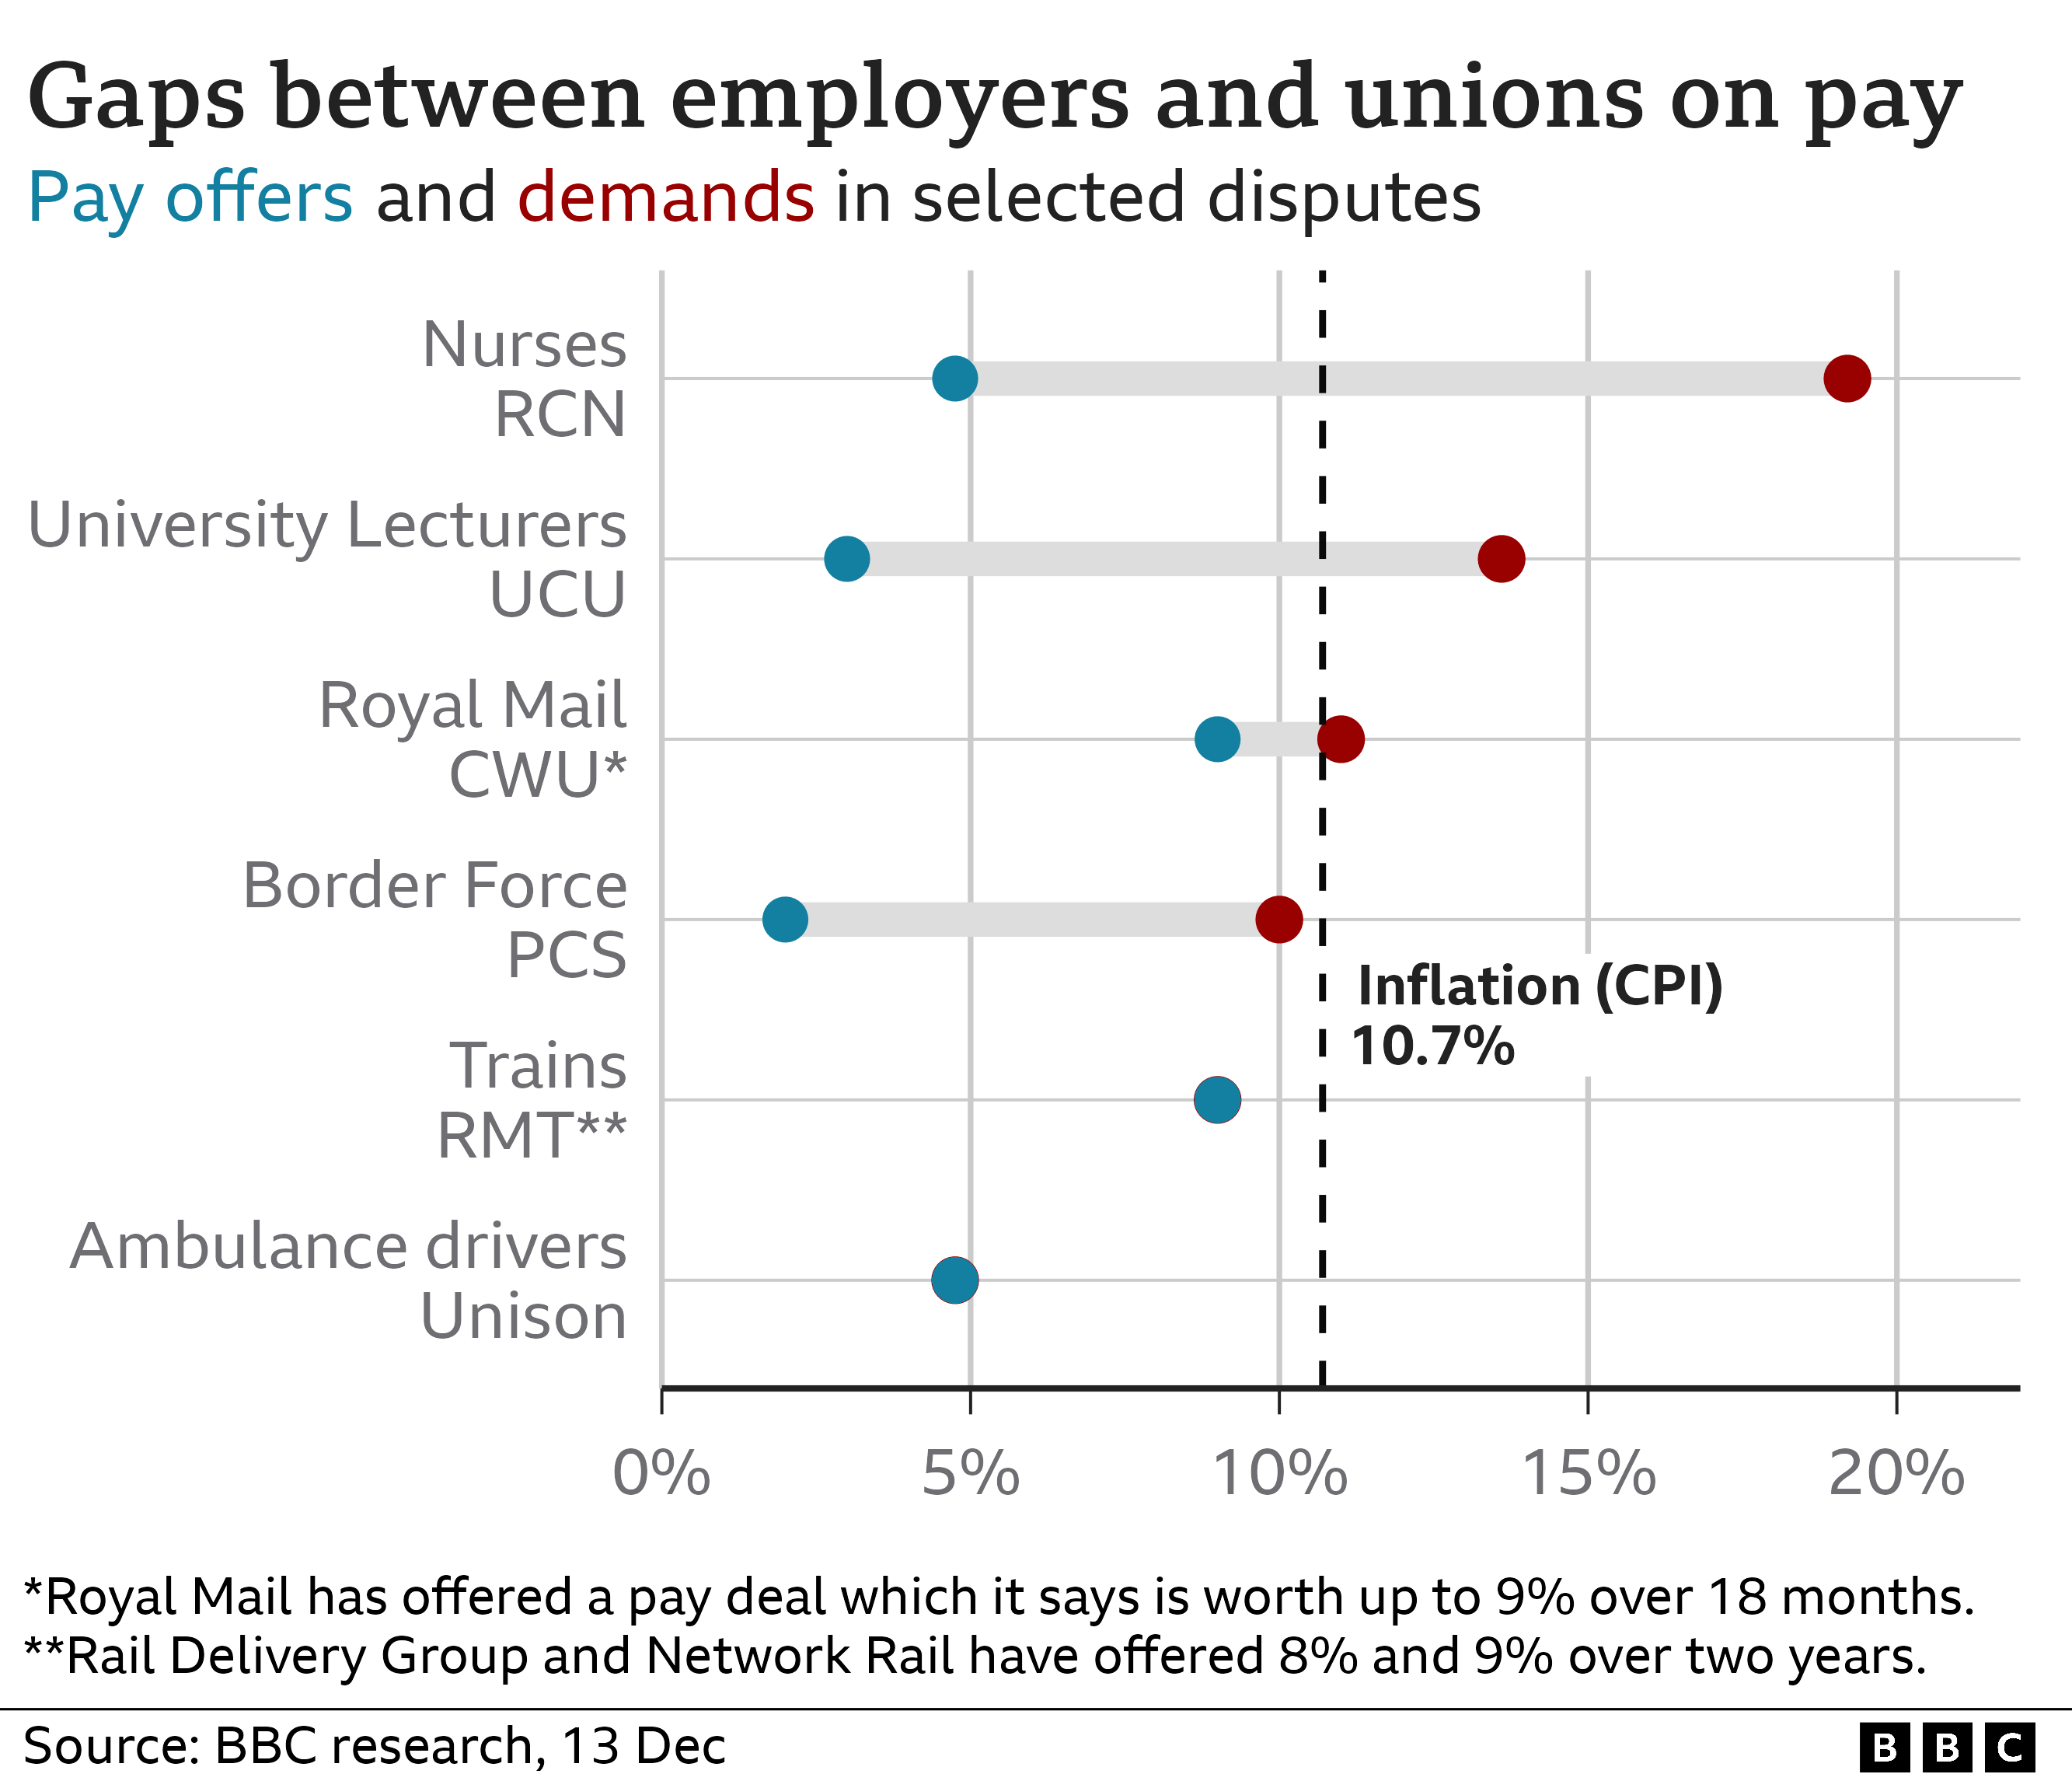 Dumbbell chart showing the gap between the pay offers on the table from employers and the demands from the relevant unions. The largest gap is for nurses, with an offer of just below 5% and a demand of just below 20%. Inflation is currently at 10.7%.